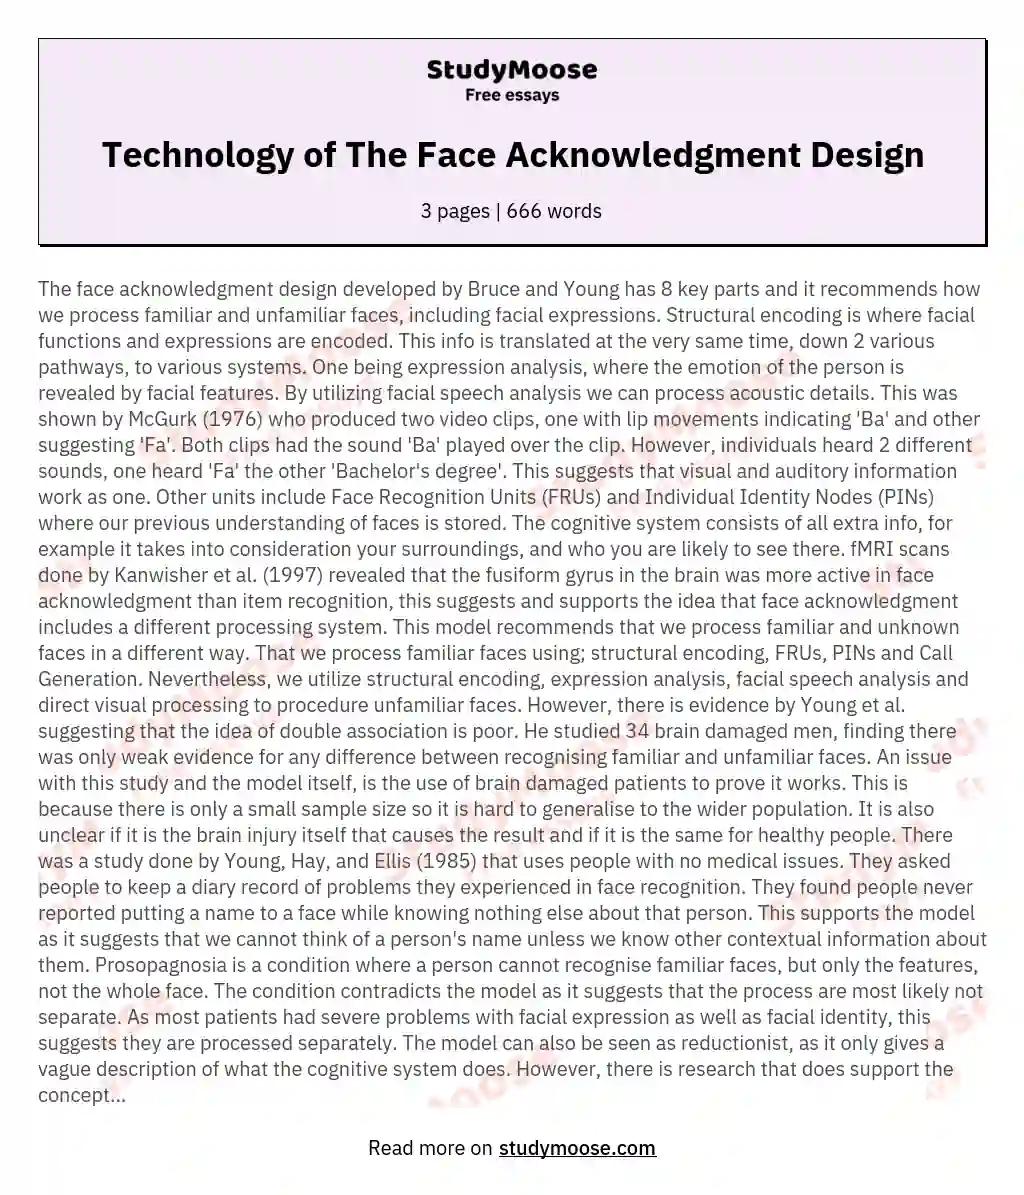 Technology of The Face Acknowledgment Design essay